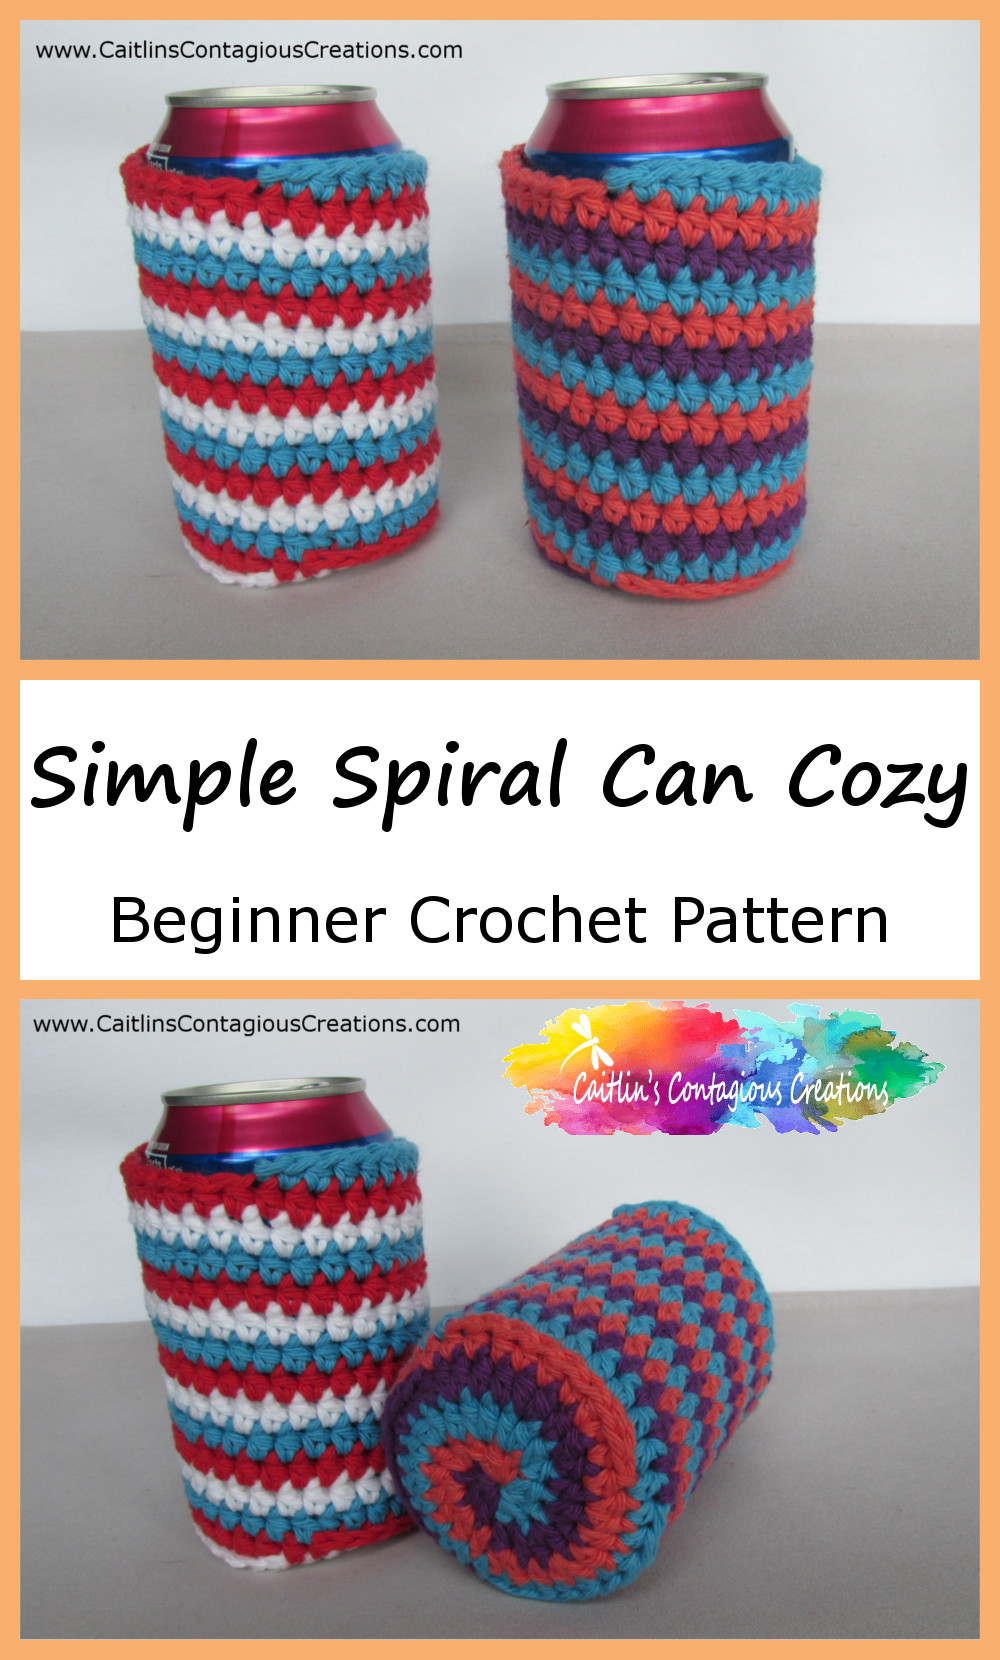 two finished can cozy patterns with text overlay, simple spiral can cozy beginner crochet pattern